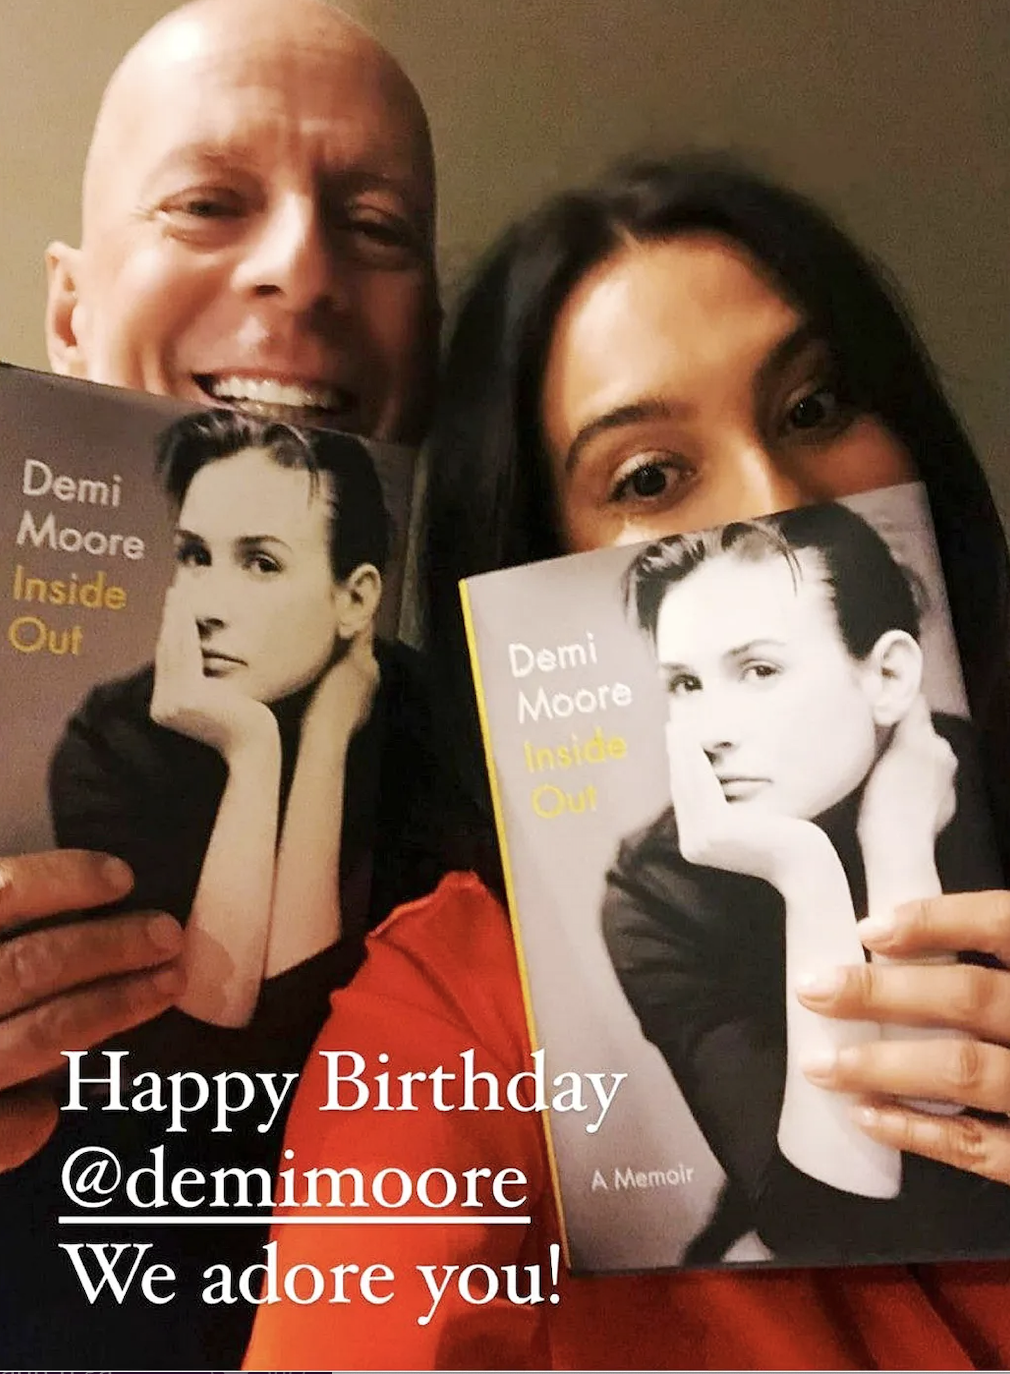 Bruce and Emma share a birthday message for Demi saying we adore you